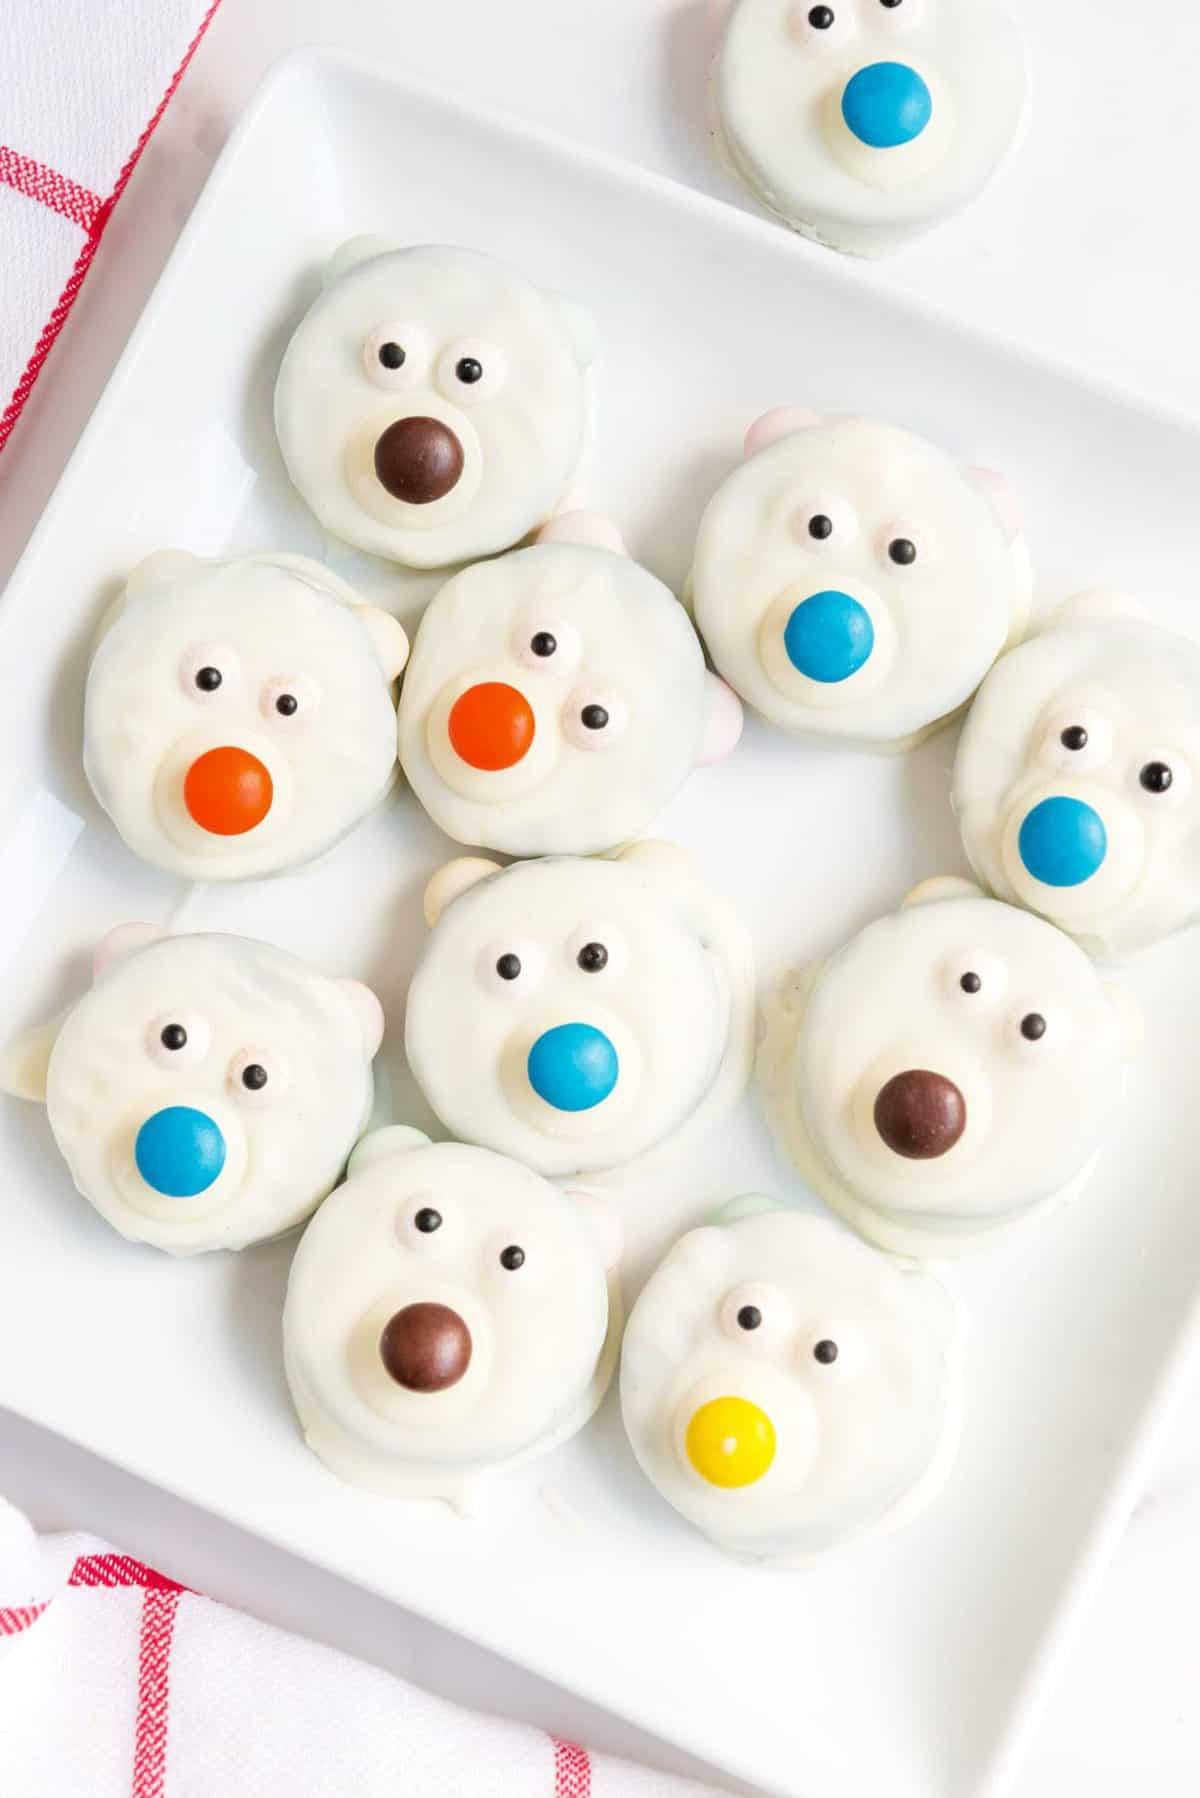 A plate full of polar bear cookies. They have different colored noses.